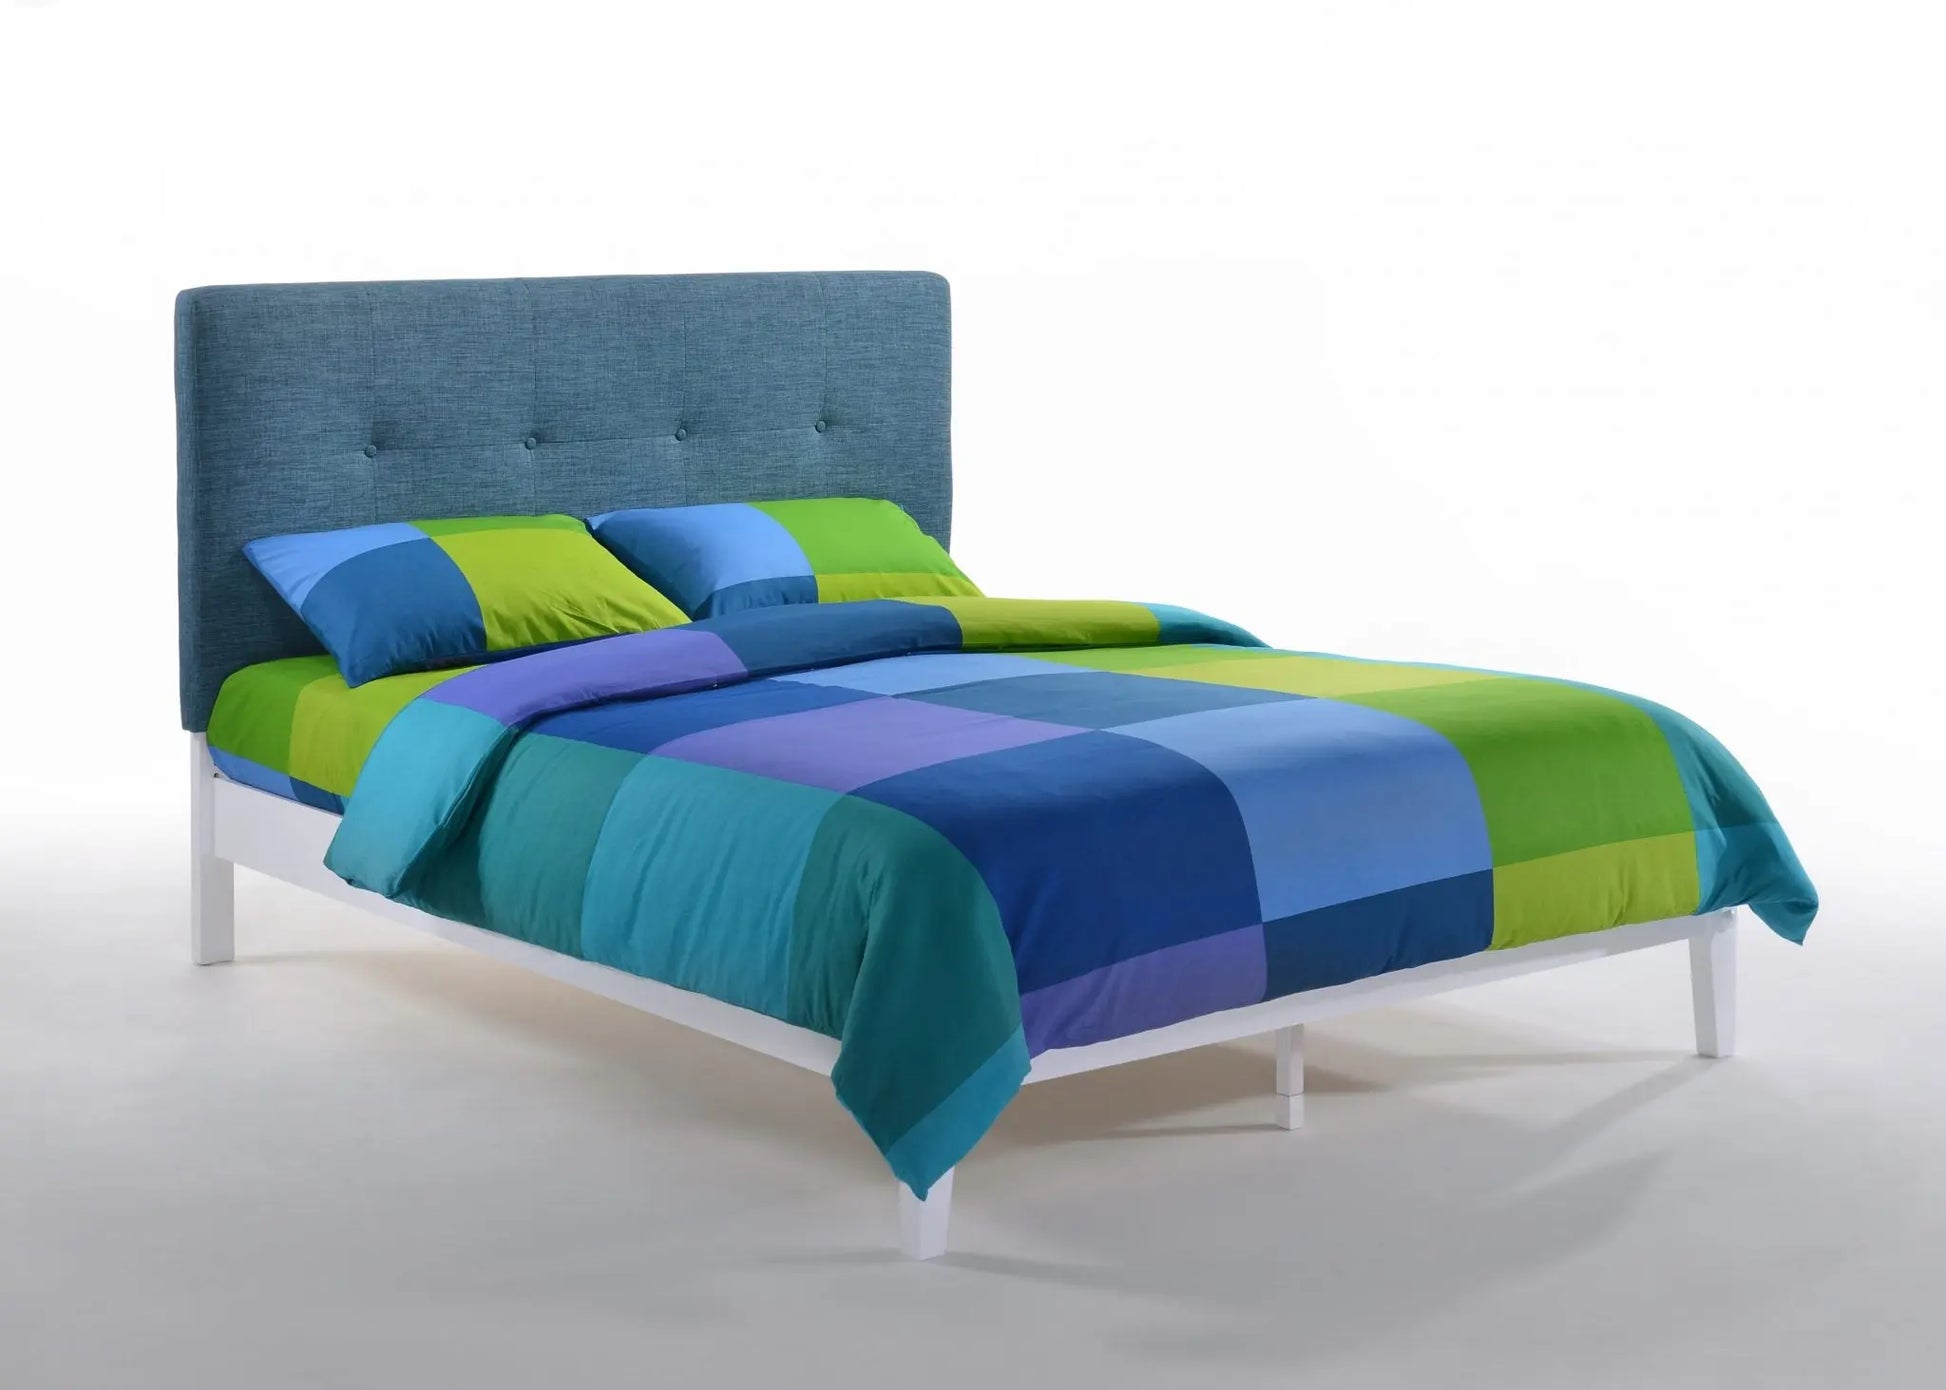 PAPRIKA BED night and day furniture